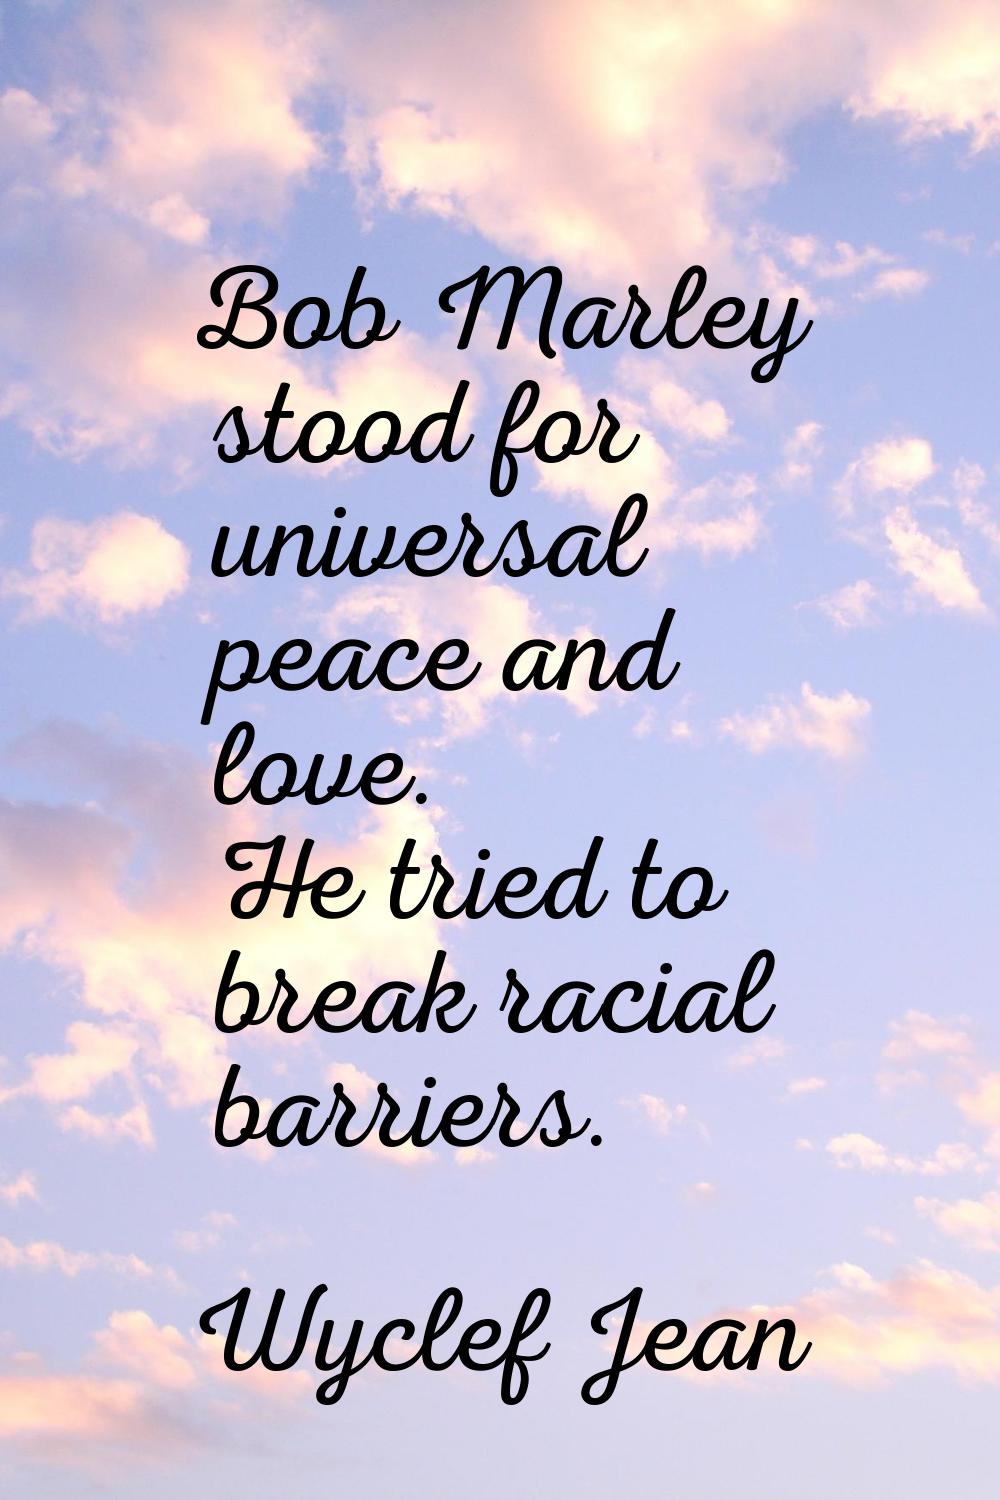 Bob Marley stood for universal peace and love. He tried to break racial barriers.